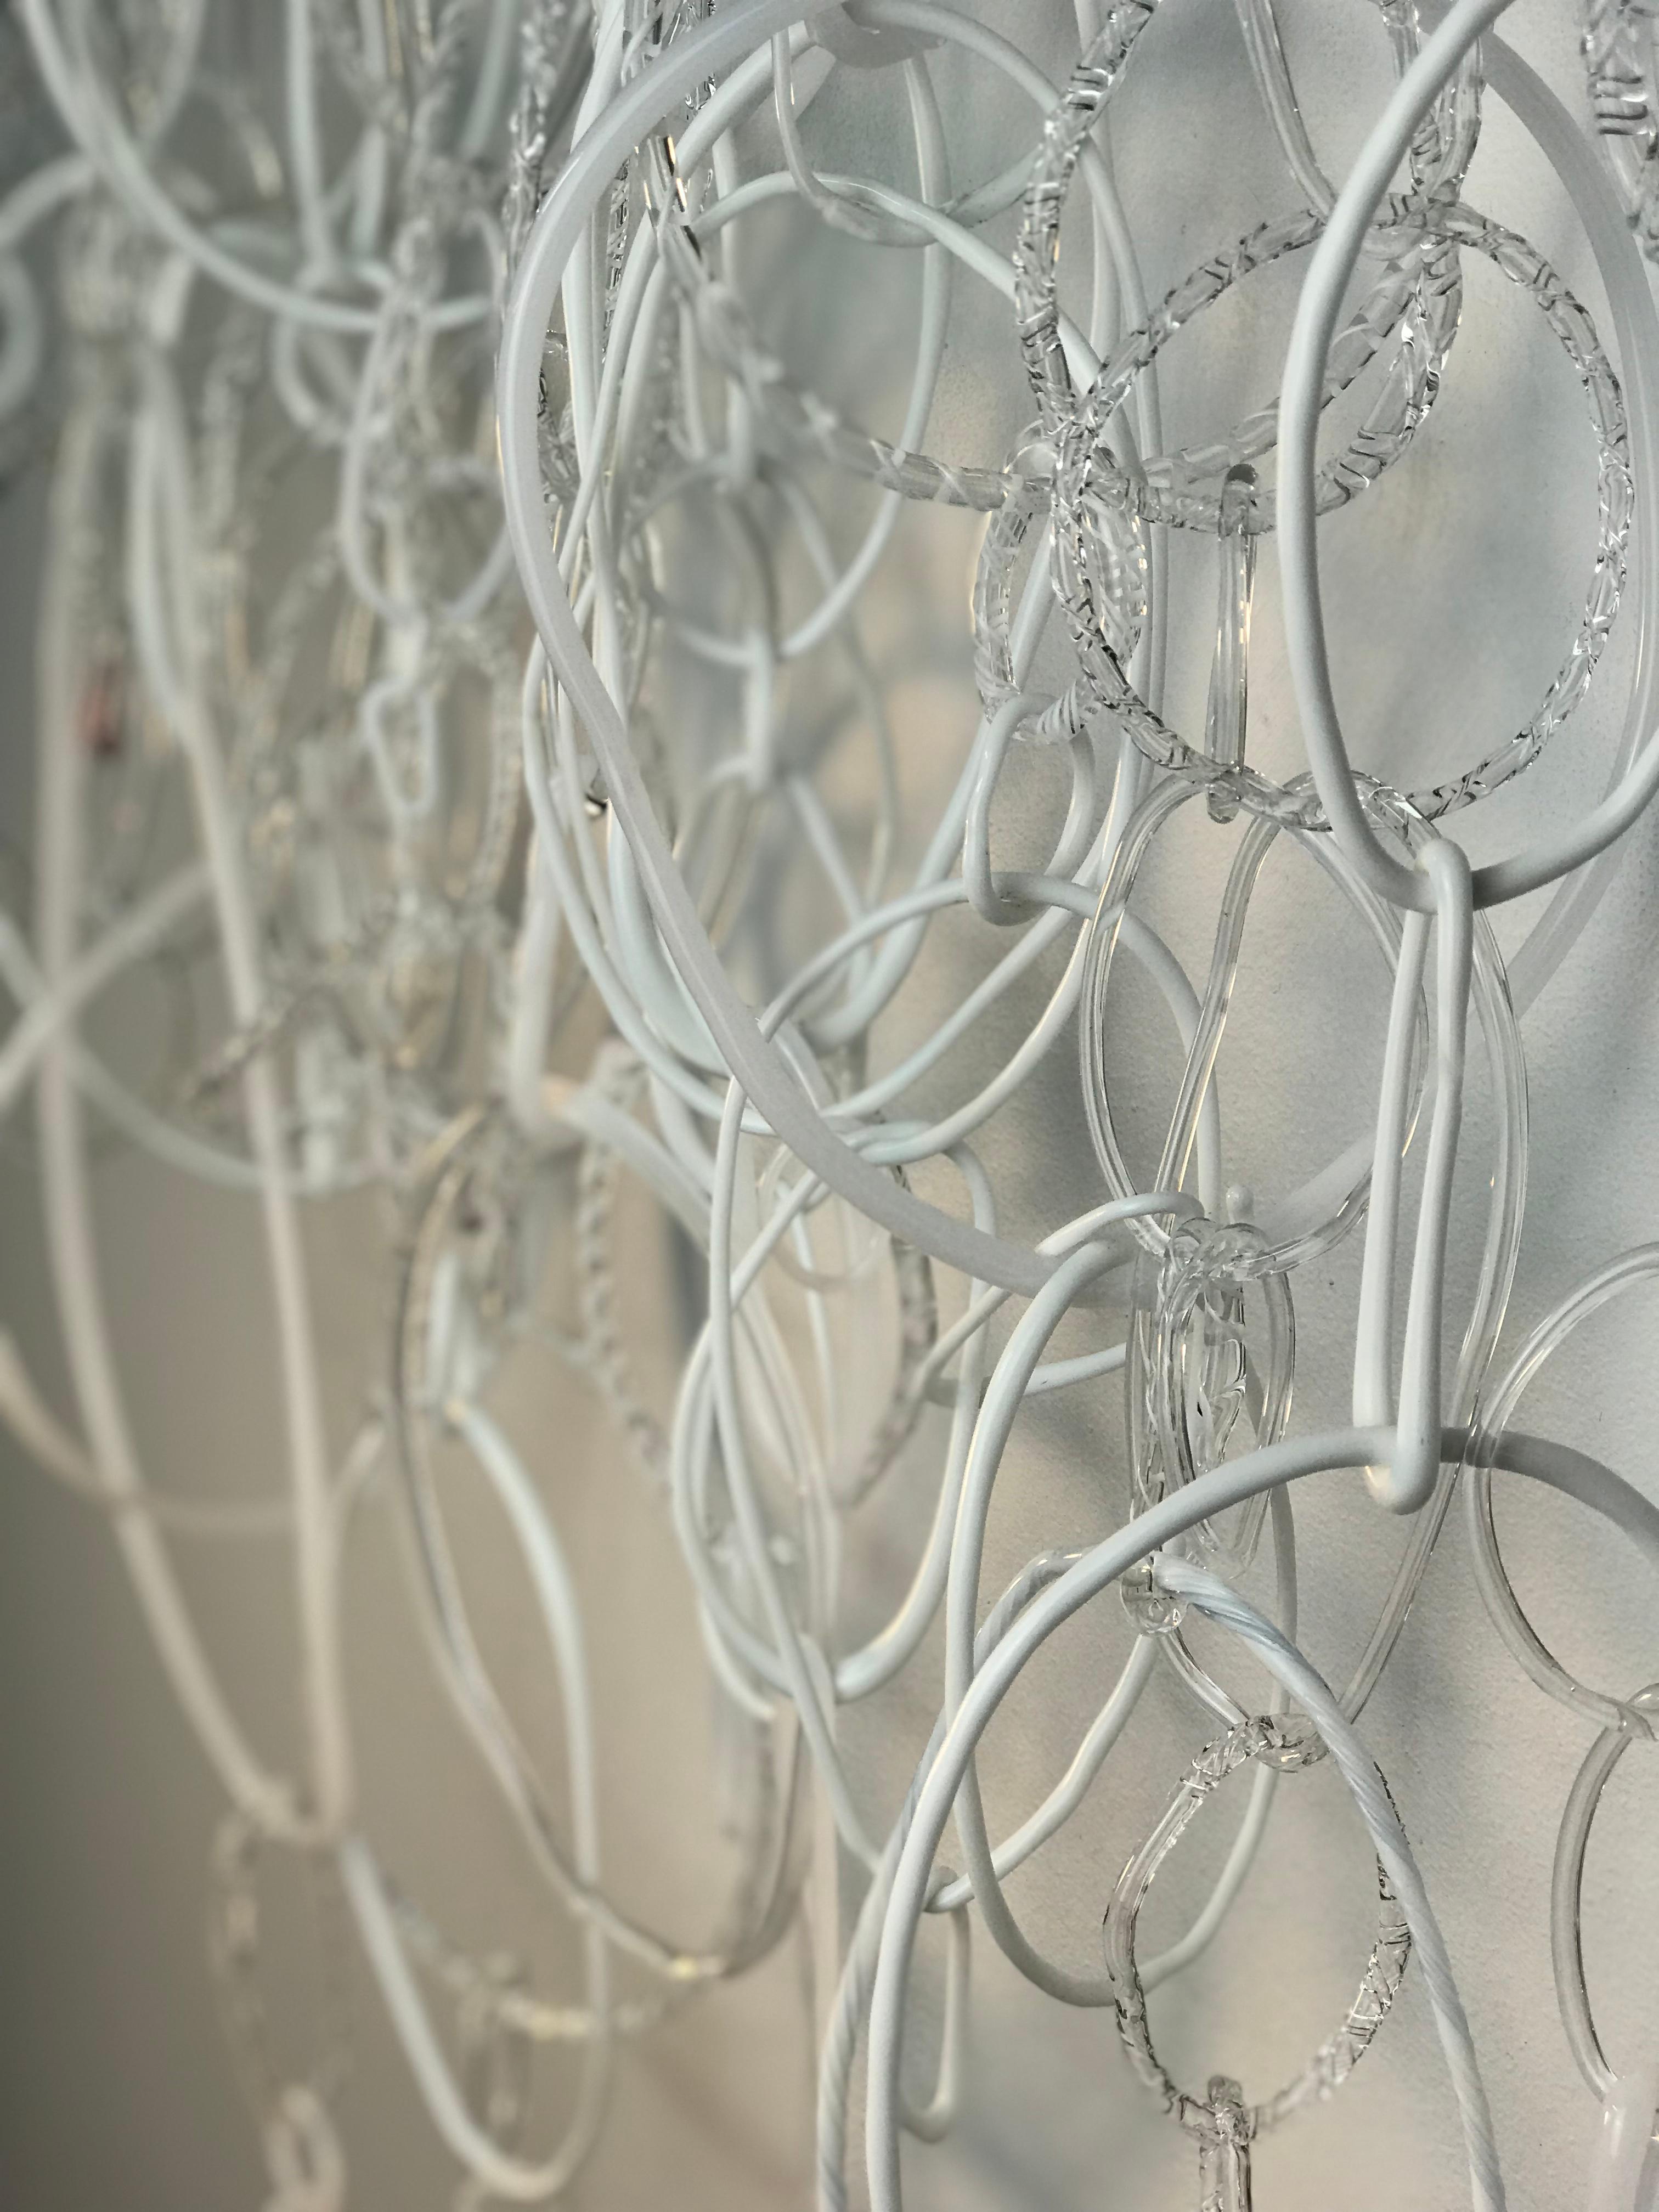 This hanging sculpture is composed of freeform circular loops in various shapes and textures of white and clear torch worked borosilicate glass, linked together and hanging from an irregularly shaped translucent white glass rod supported by